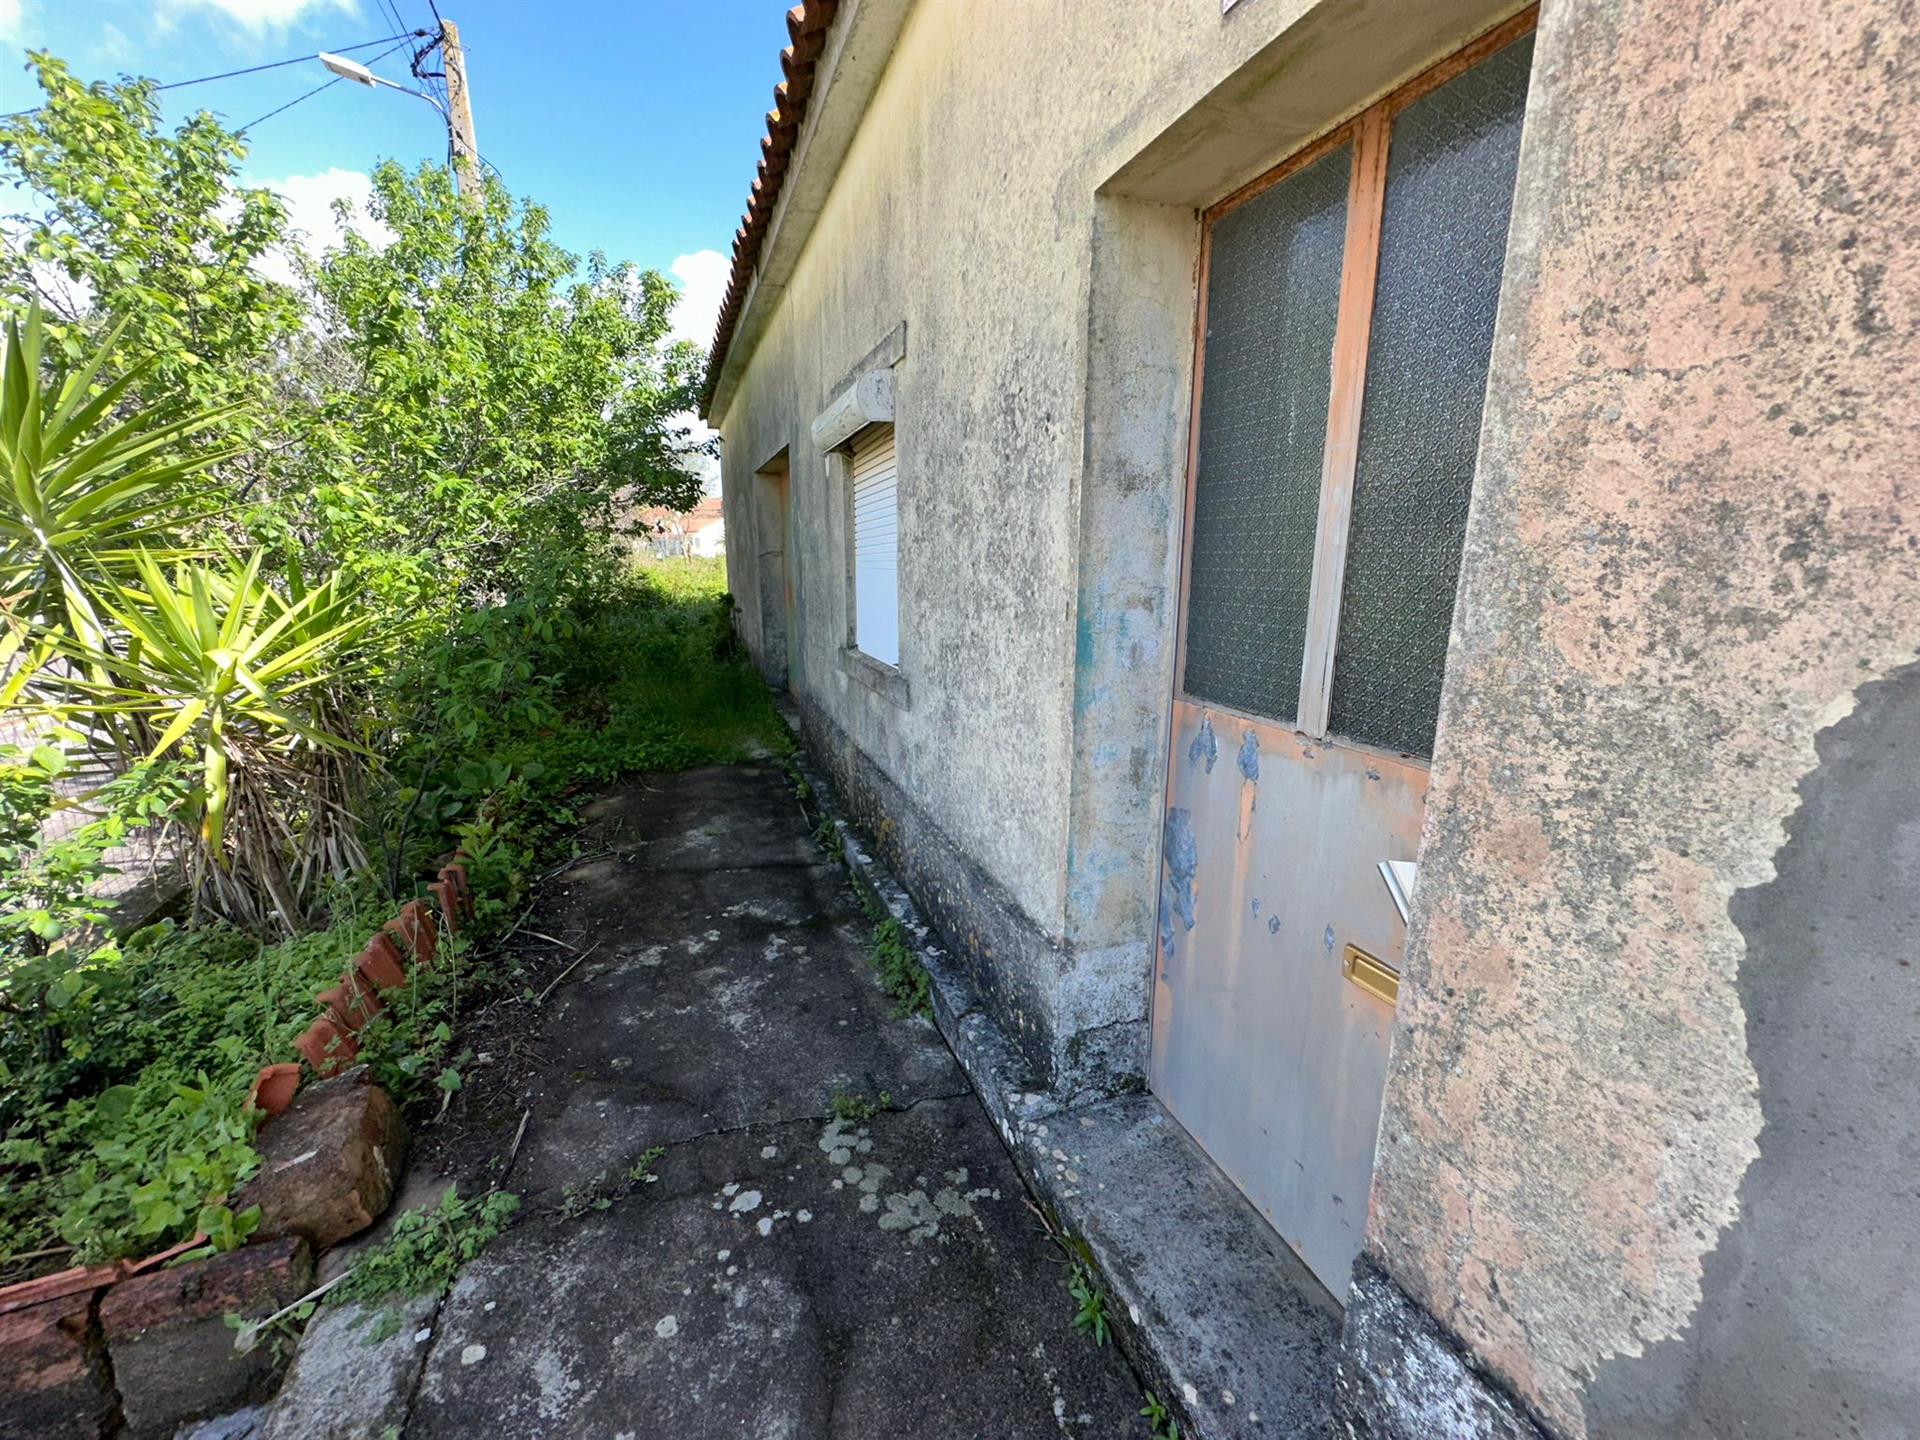 2-Bedr. House near Cadaval, with patio, to restore